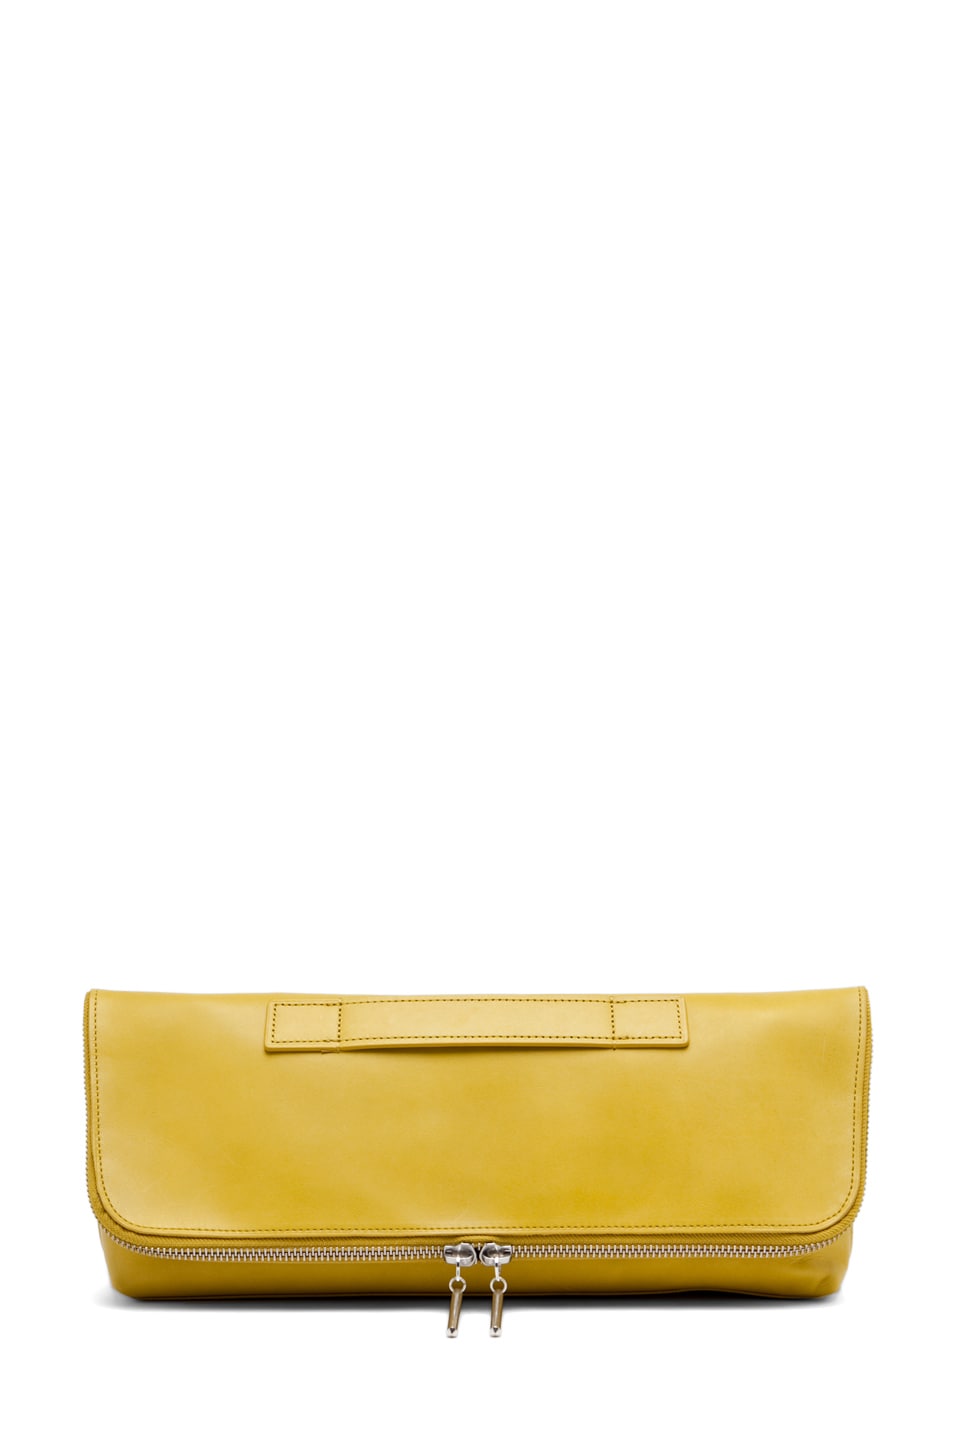 Image 1 of 3.1 phillip lim 31 Minute Bag in Limon